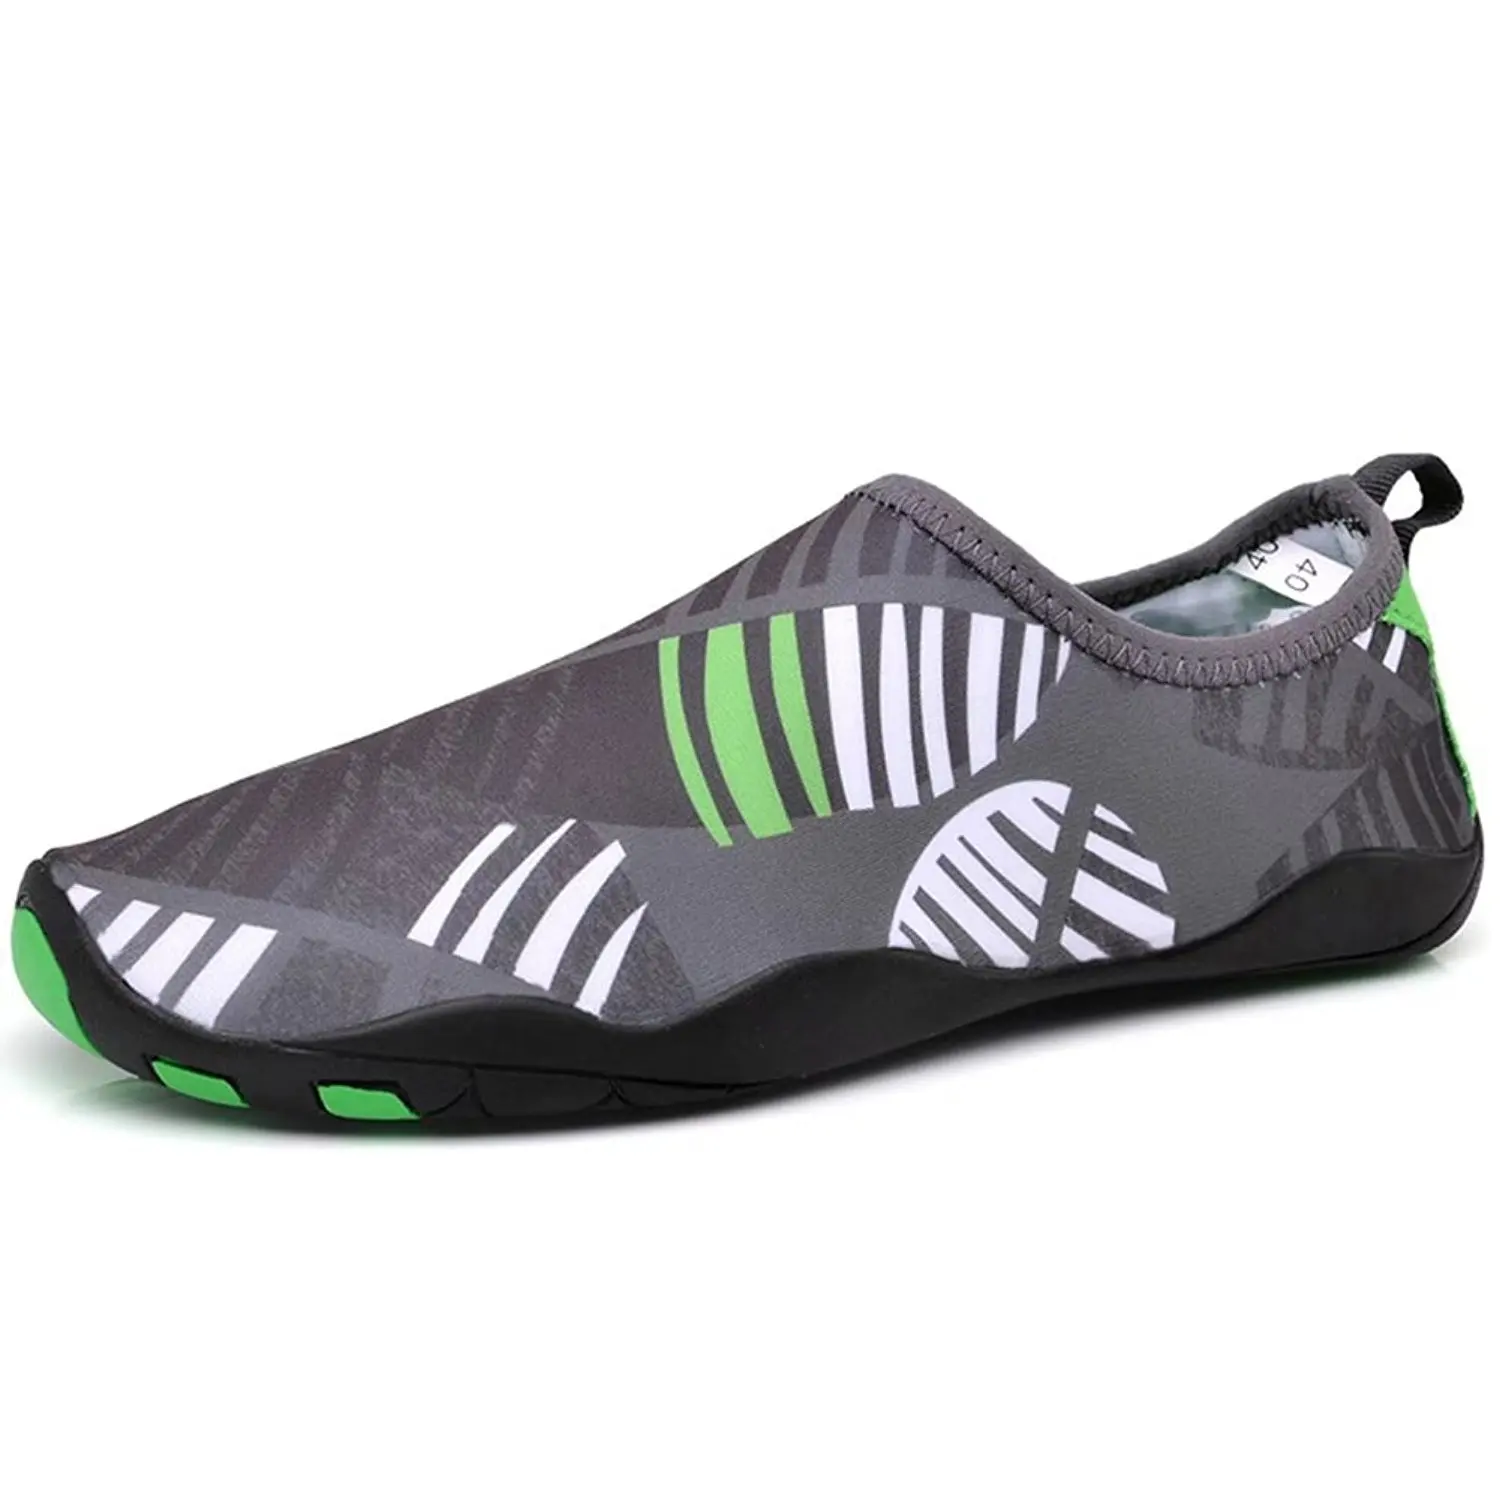 Cheap Shoes Rafting, find Shoes Rafting deals on line at Alibaba.com